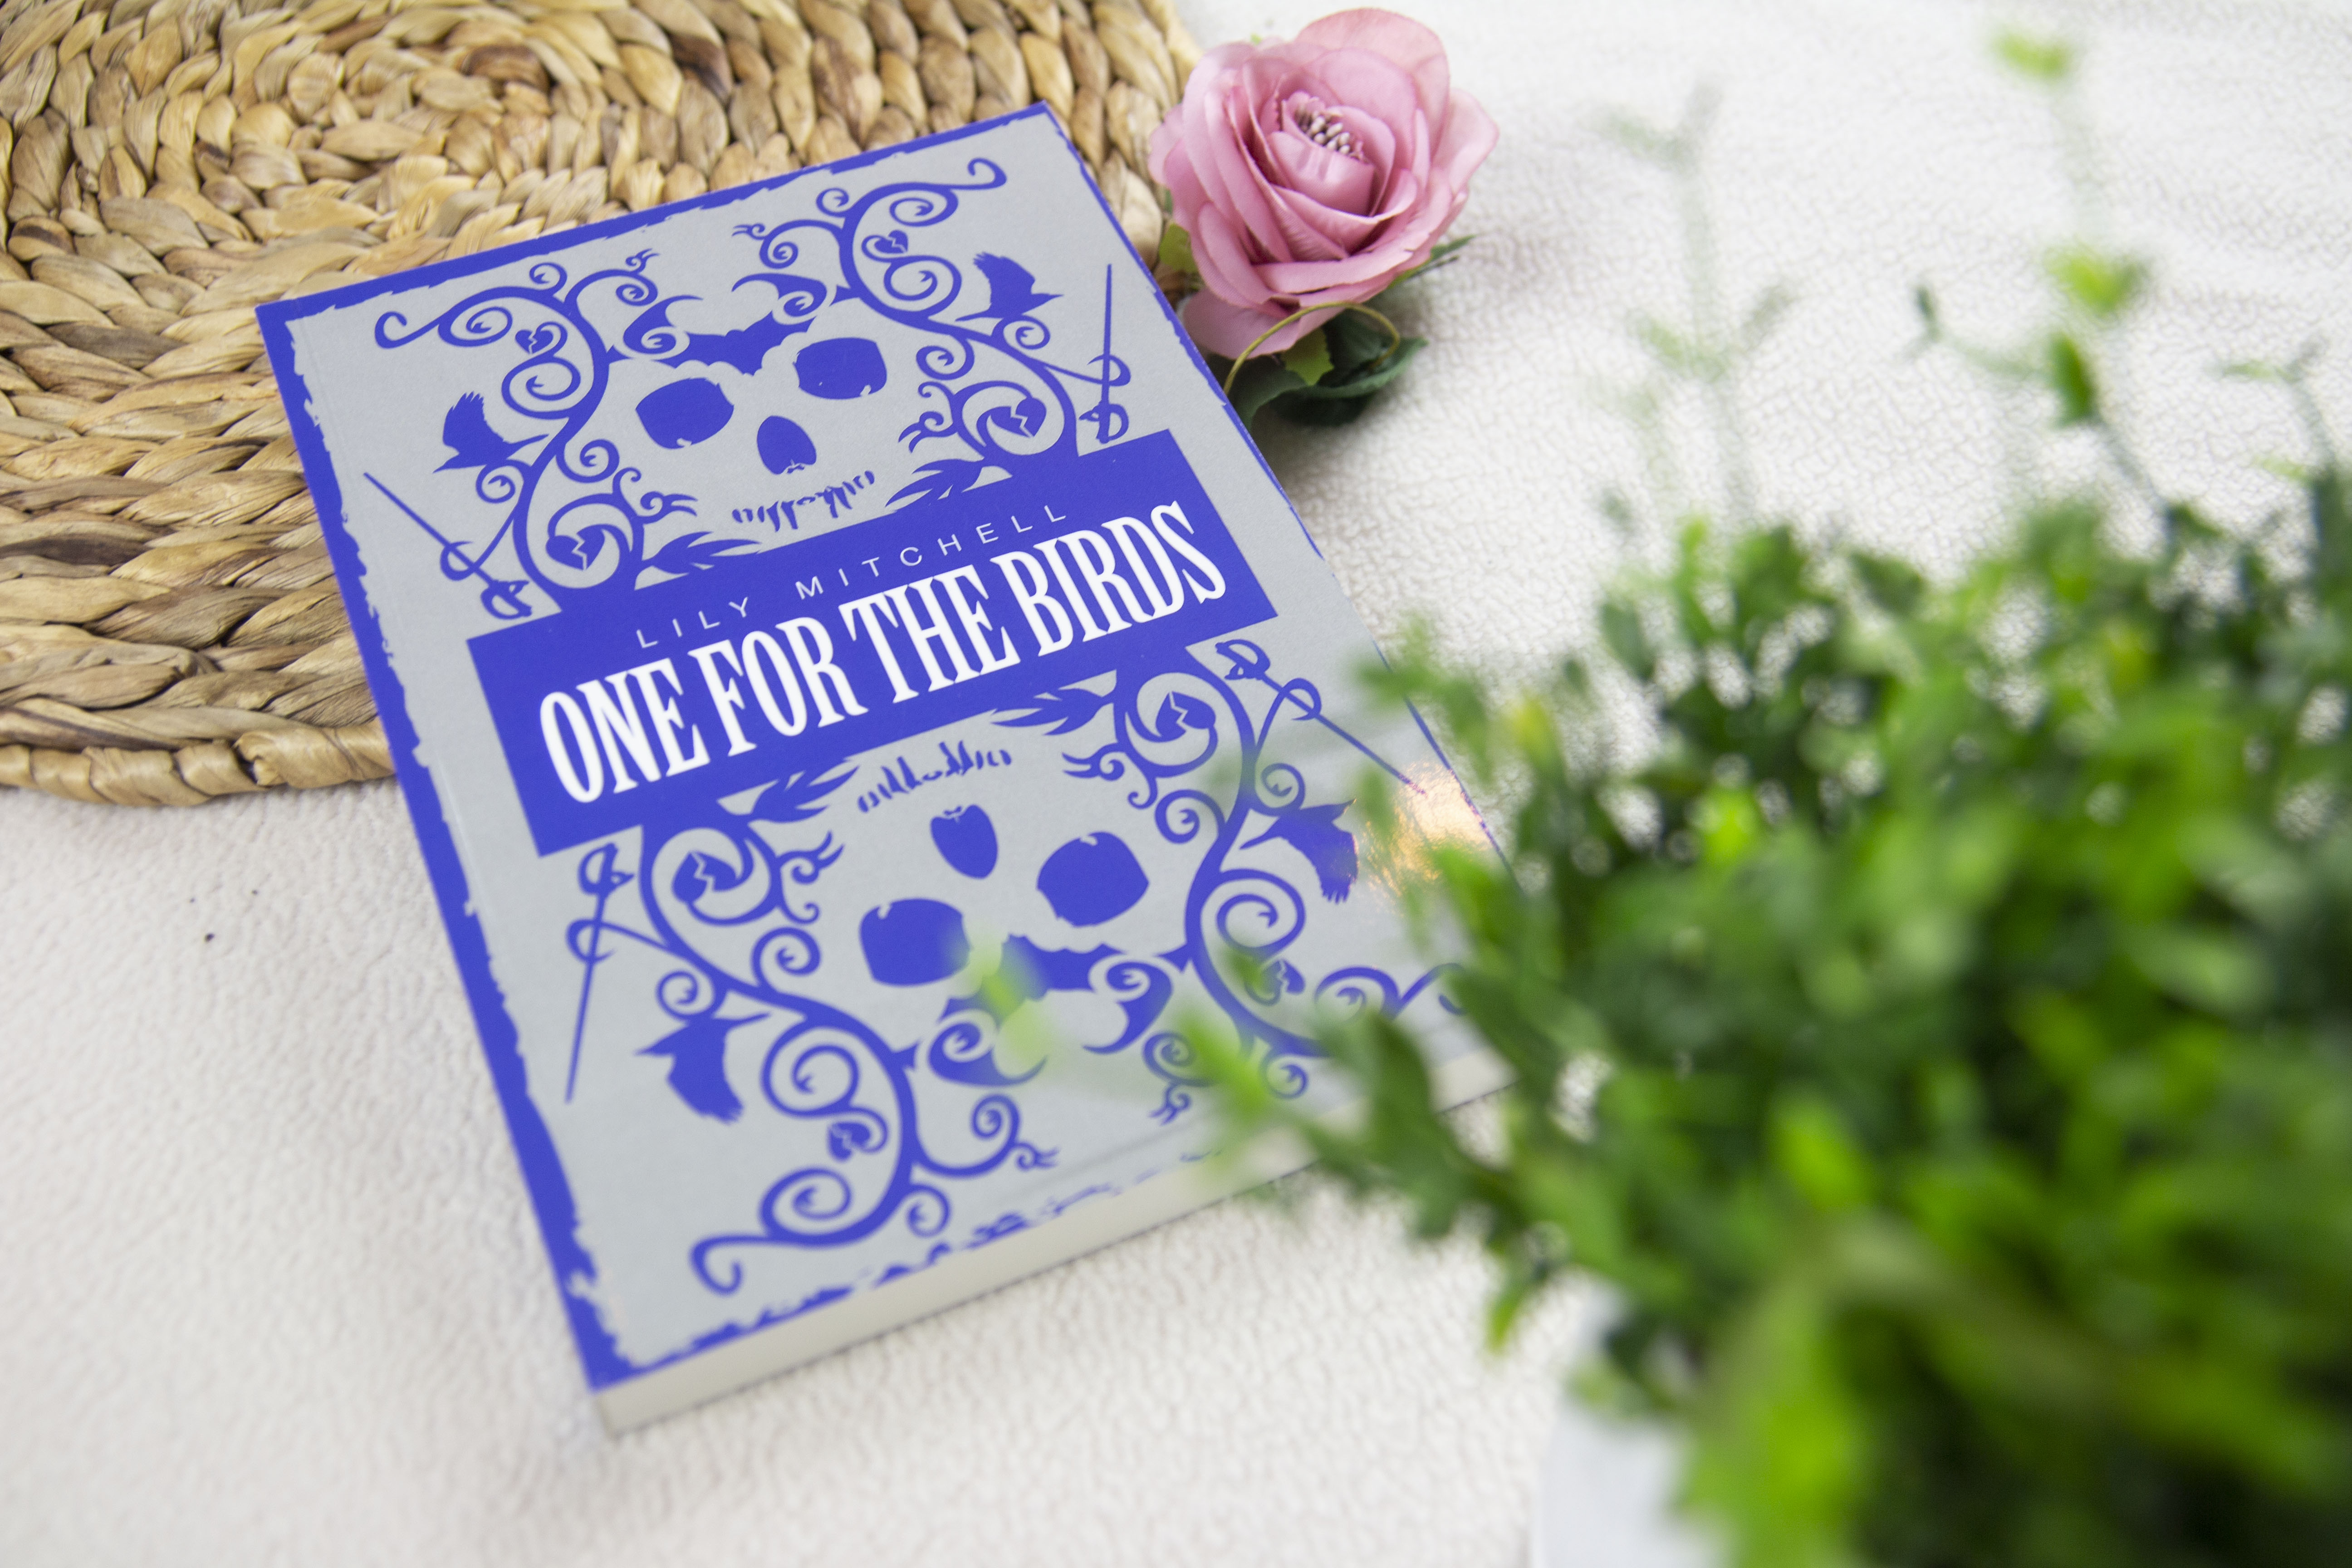 One for the birds – Lily Mitchell